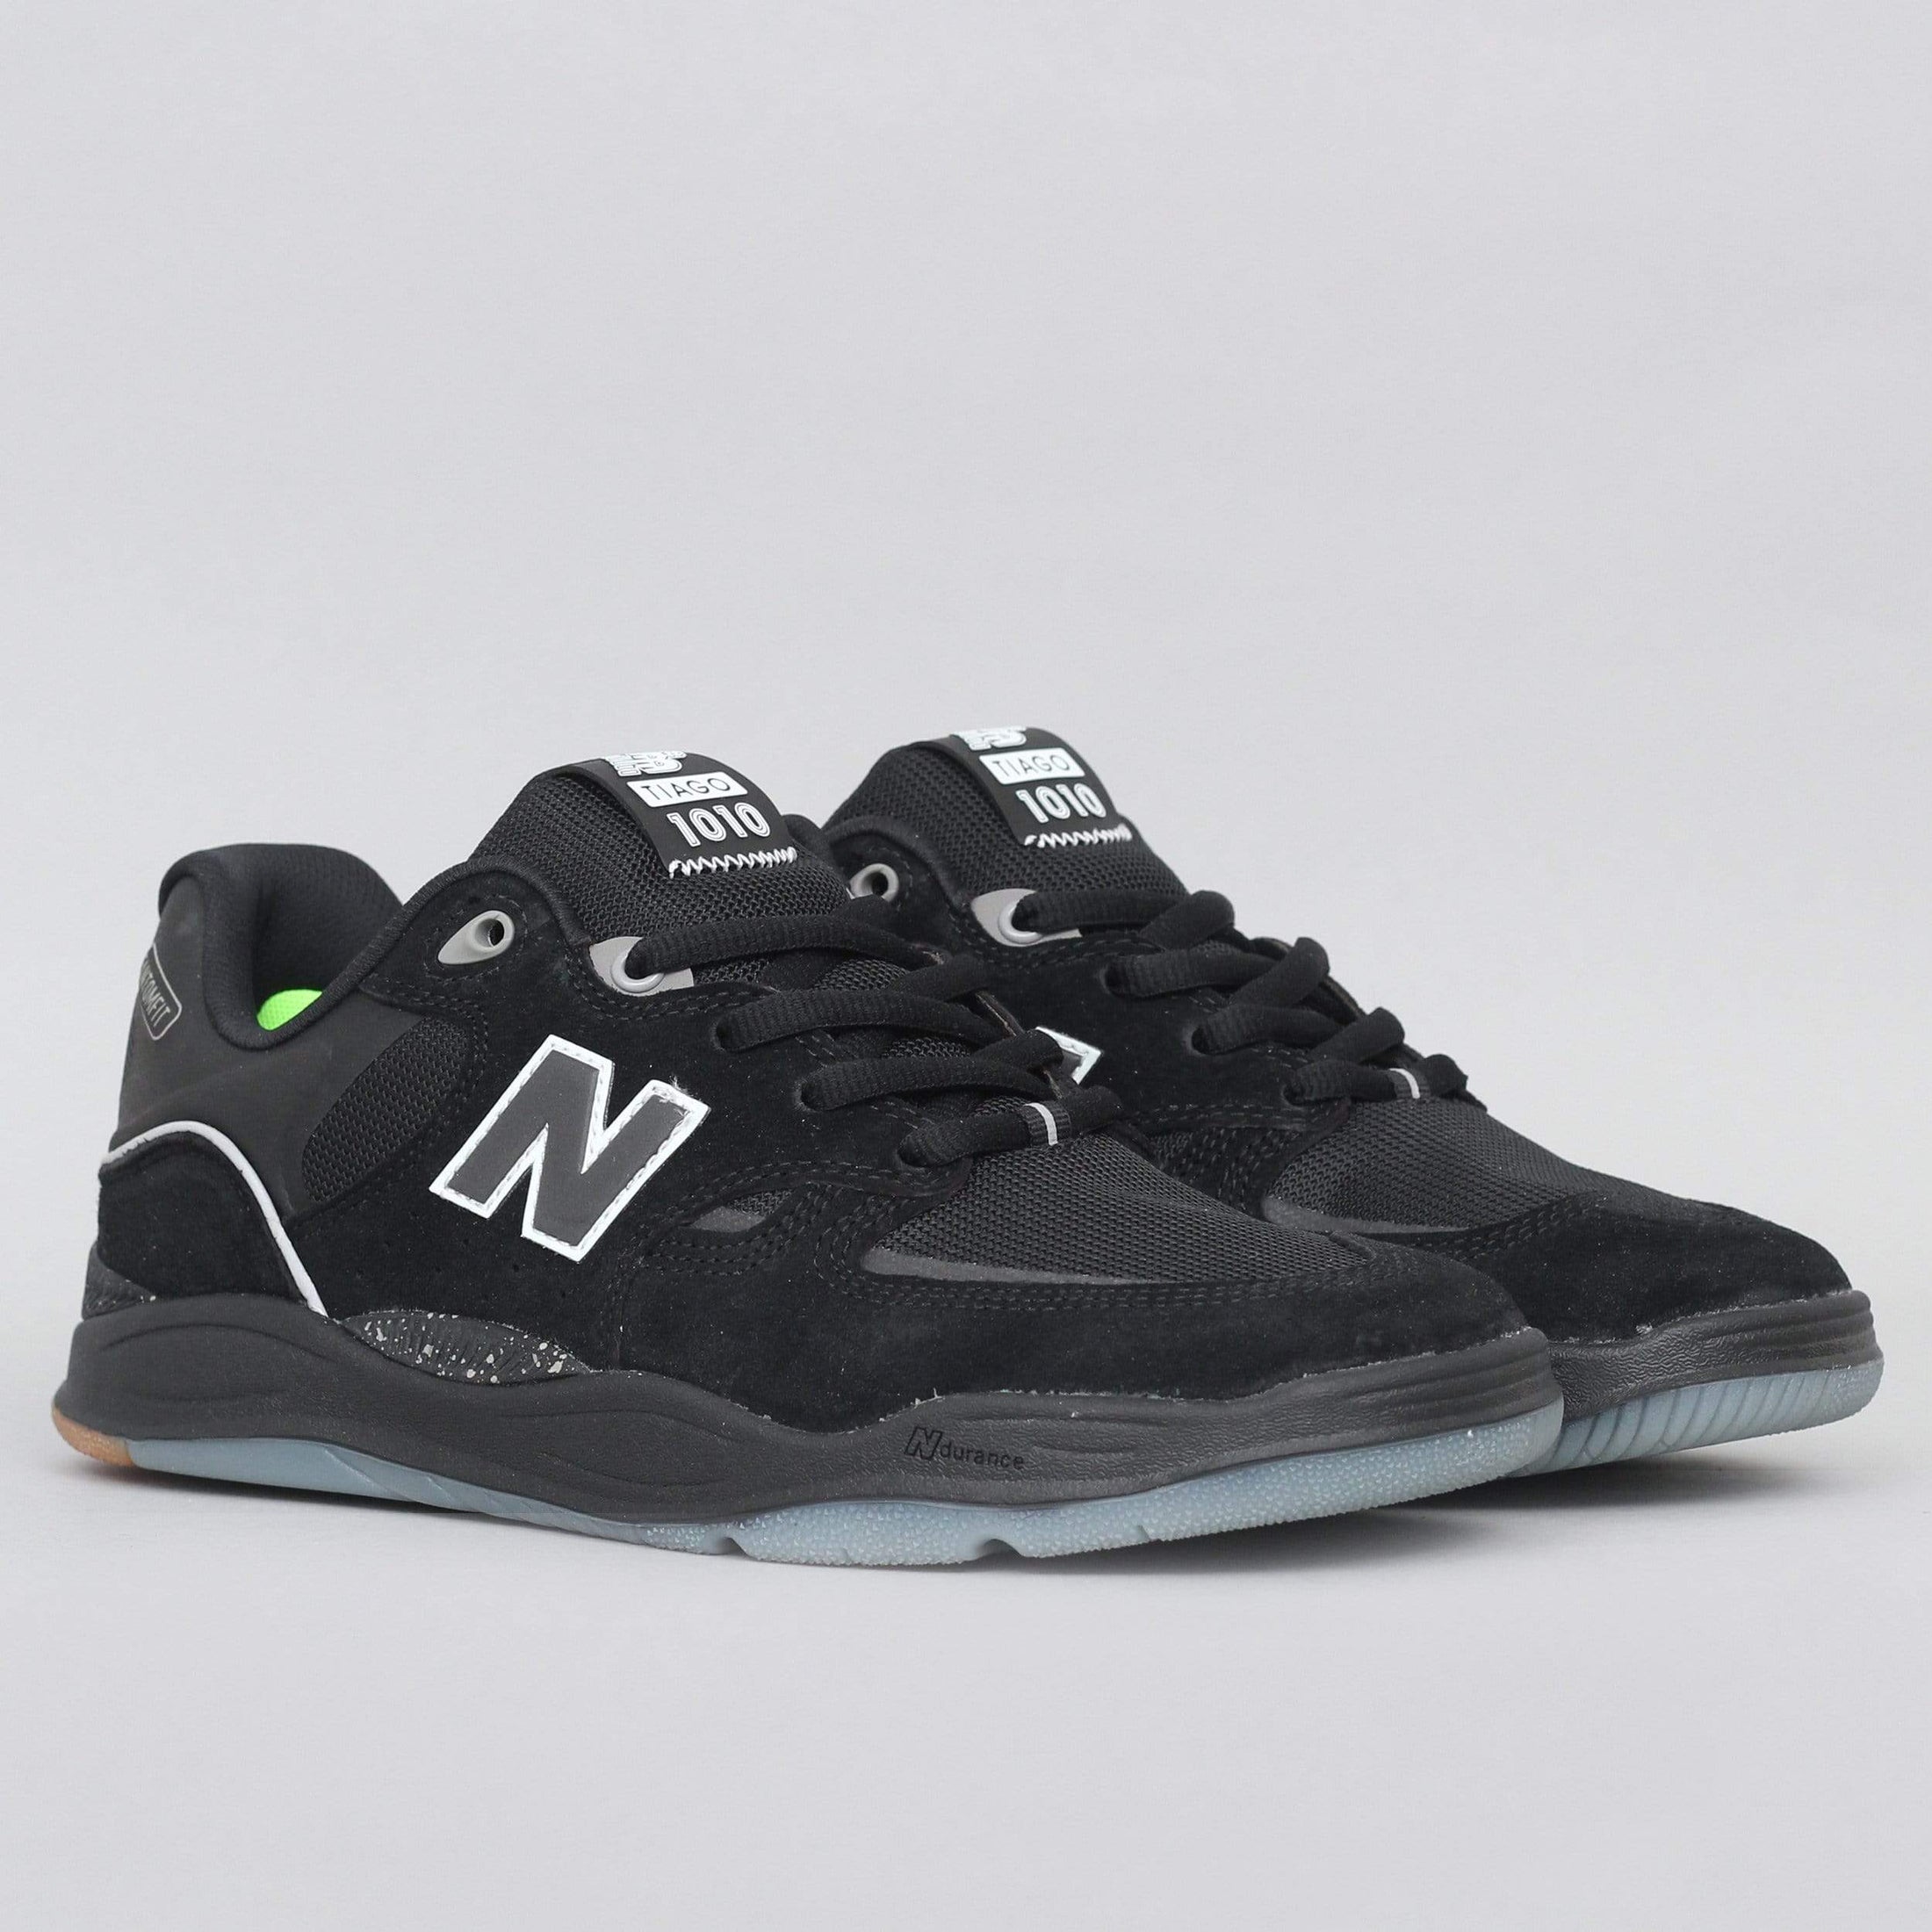 New Balance Tiago 1010 Shoes Black / Red